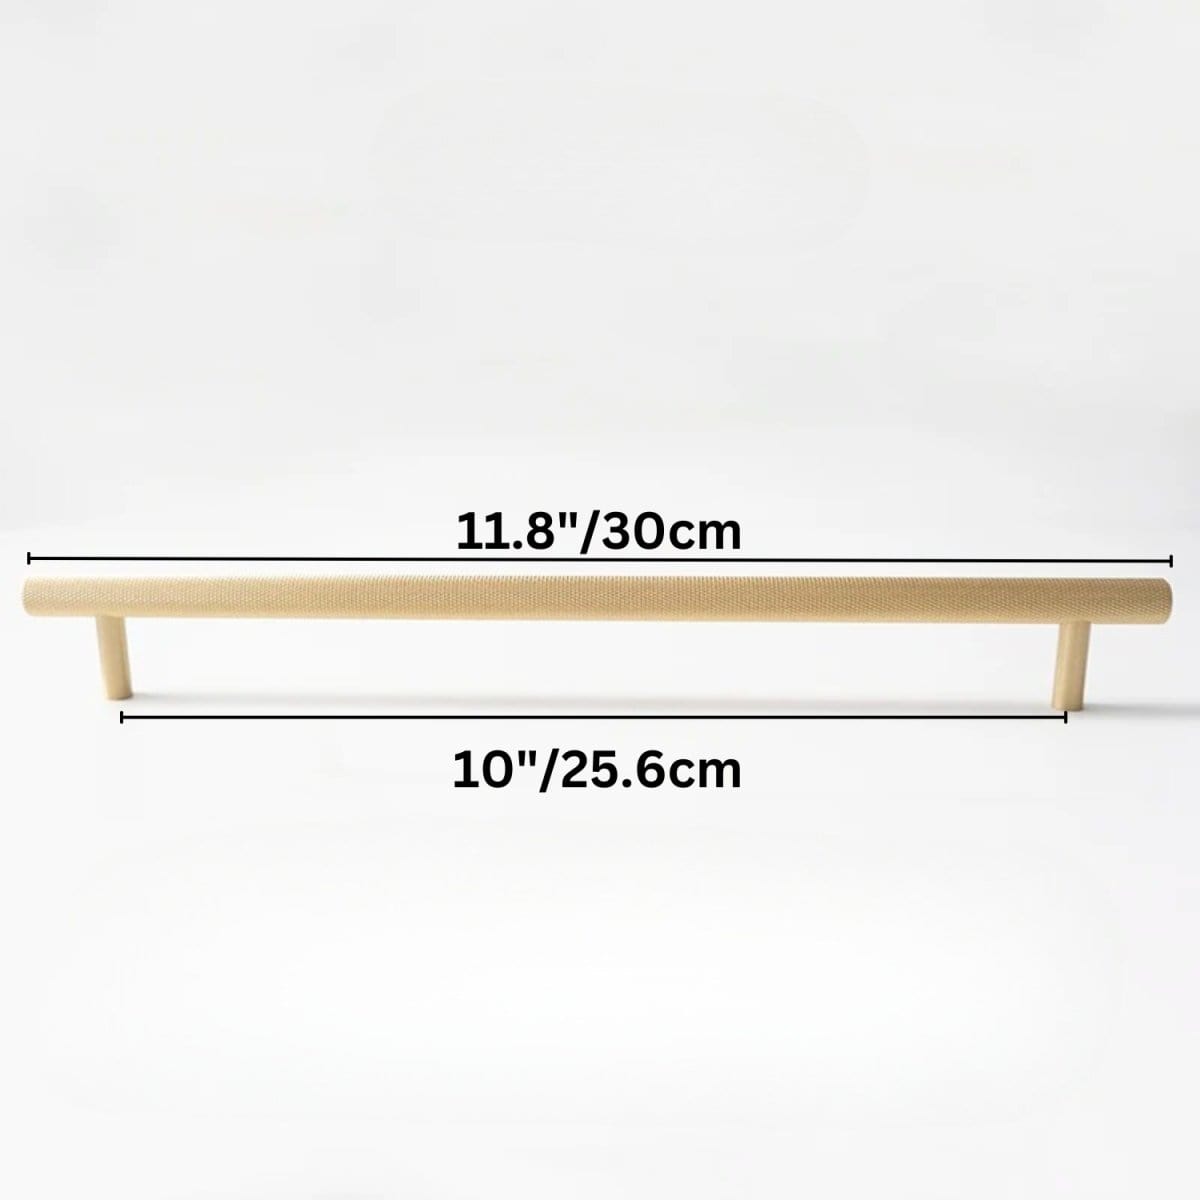 Residence Supply Hole to Hole: 10" / 25.6cm / Satin Brass Cucao Knob & Pull Bar